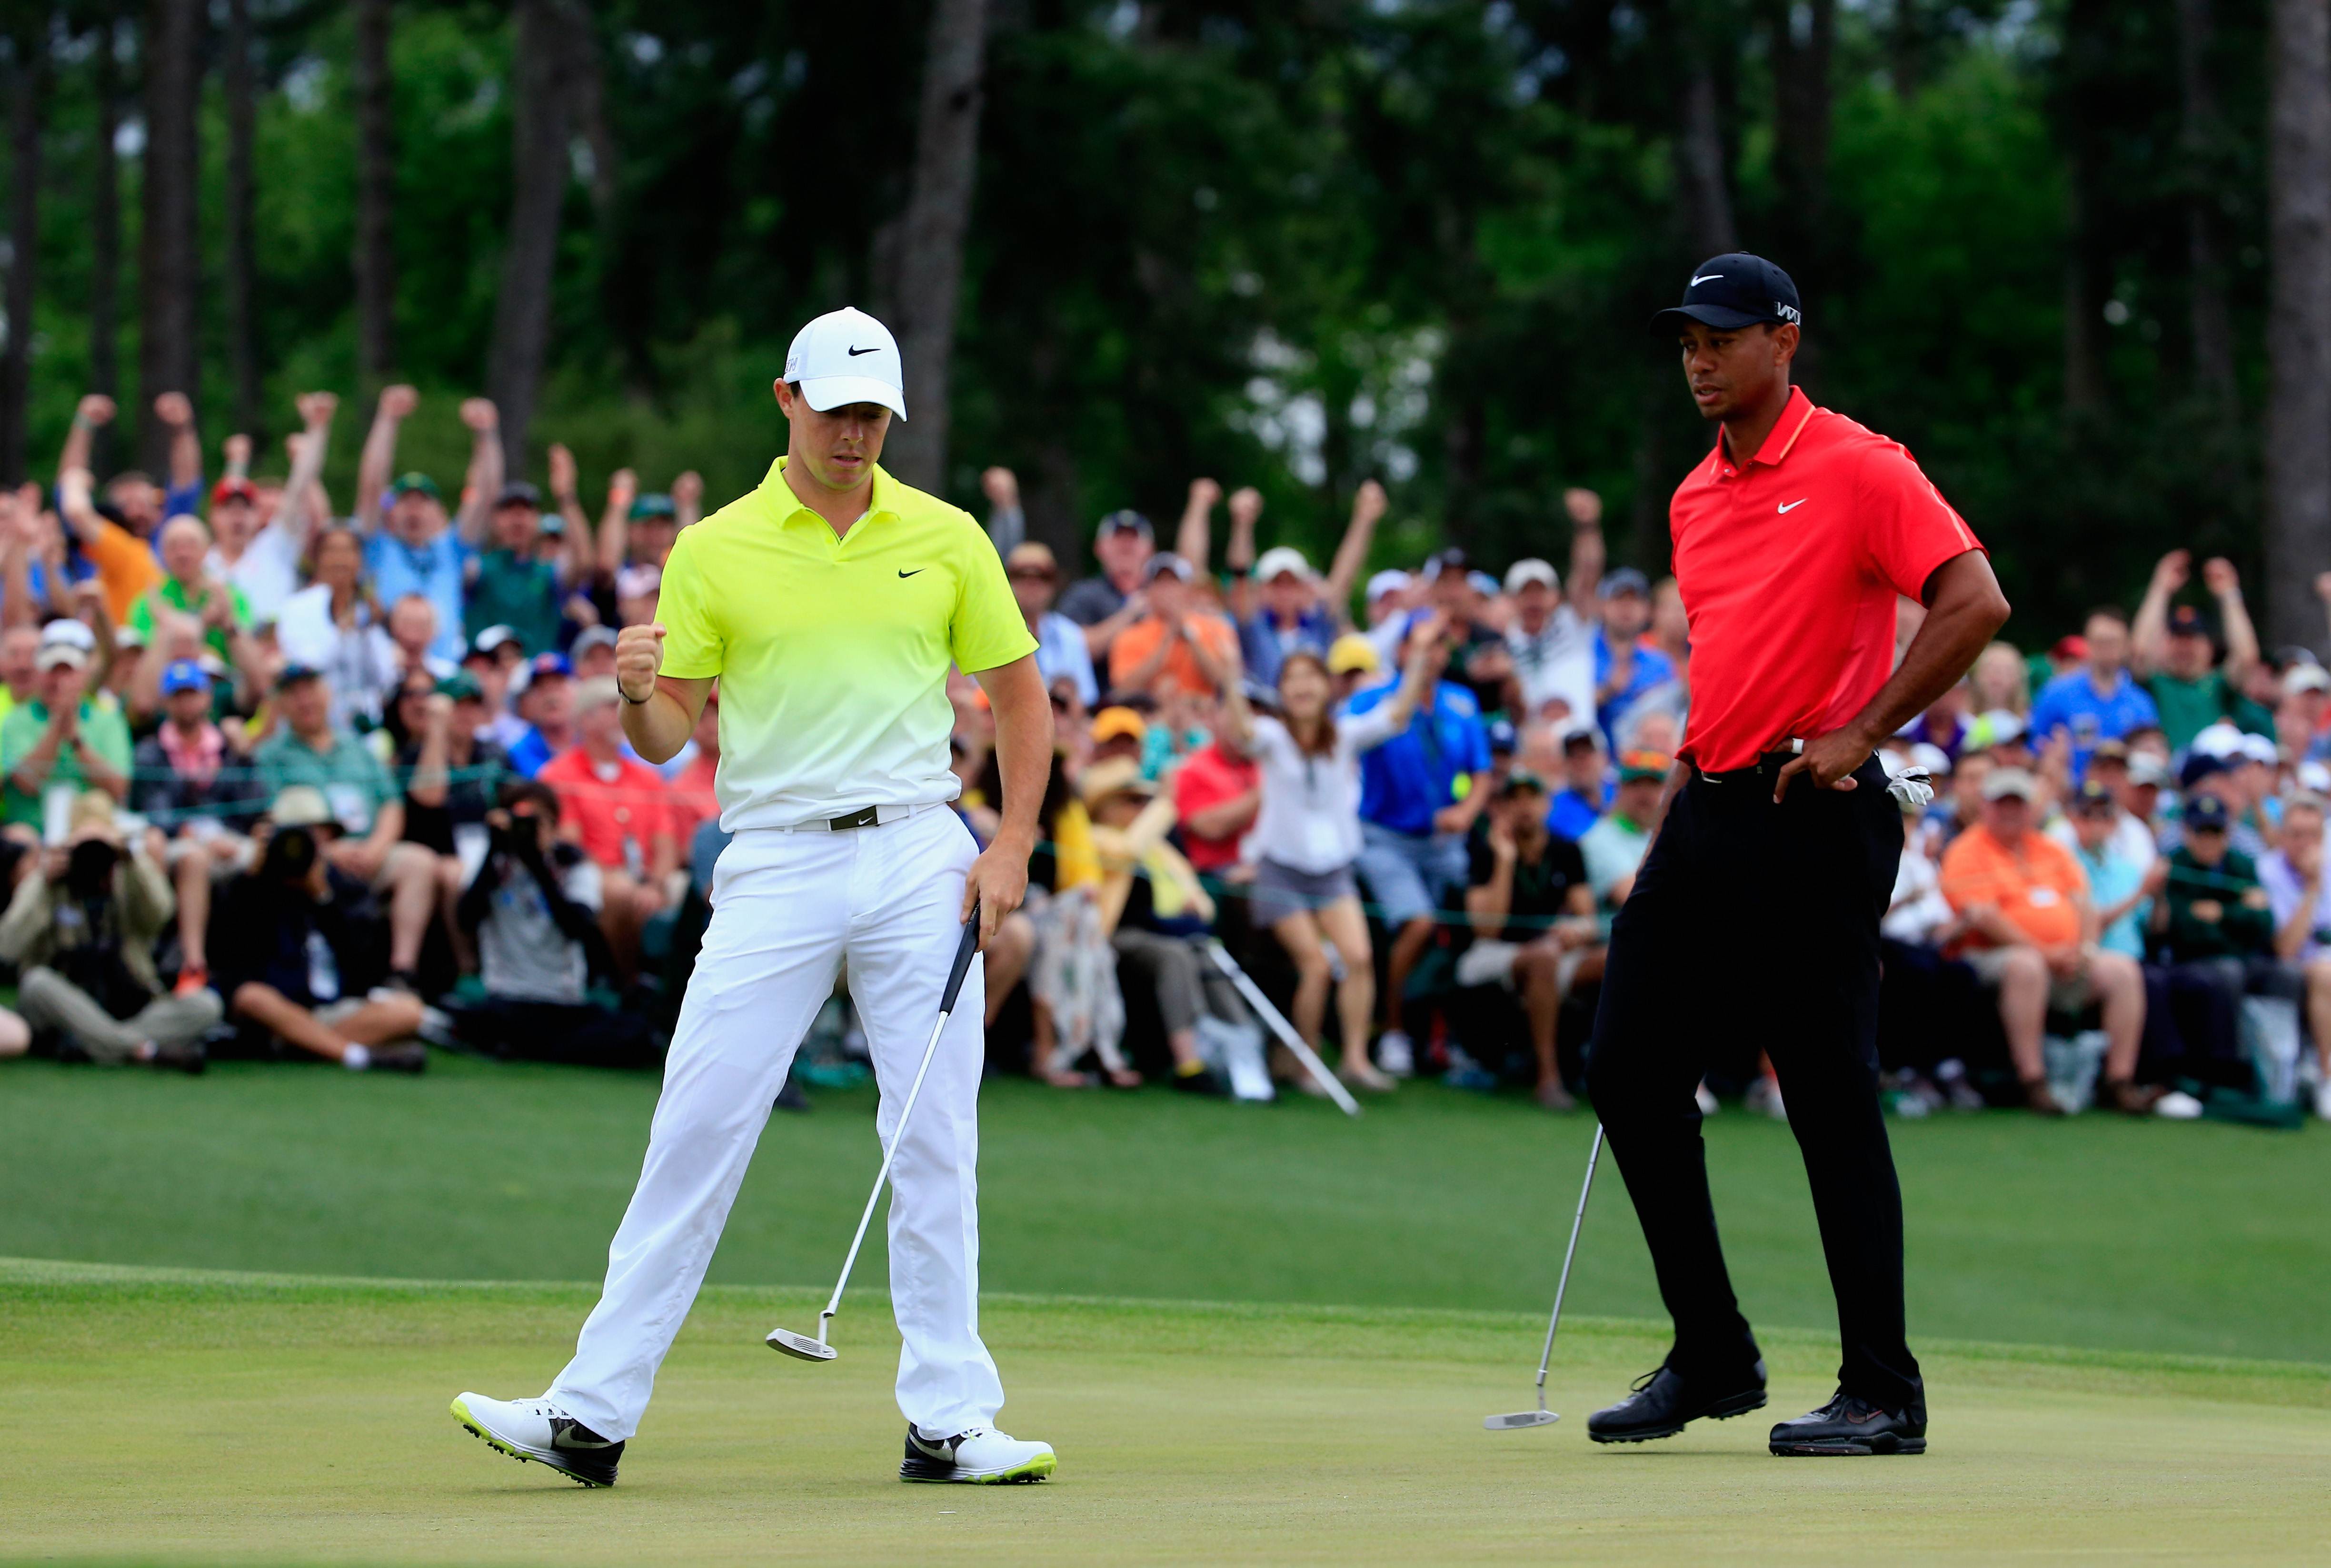 Rory McIlroy birdies the last hole at Augusta National as playing partner Tiger Woods looks on. Photo: AFP